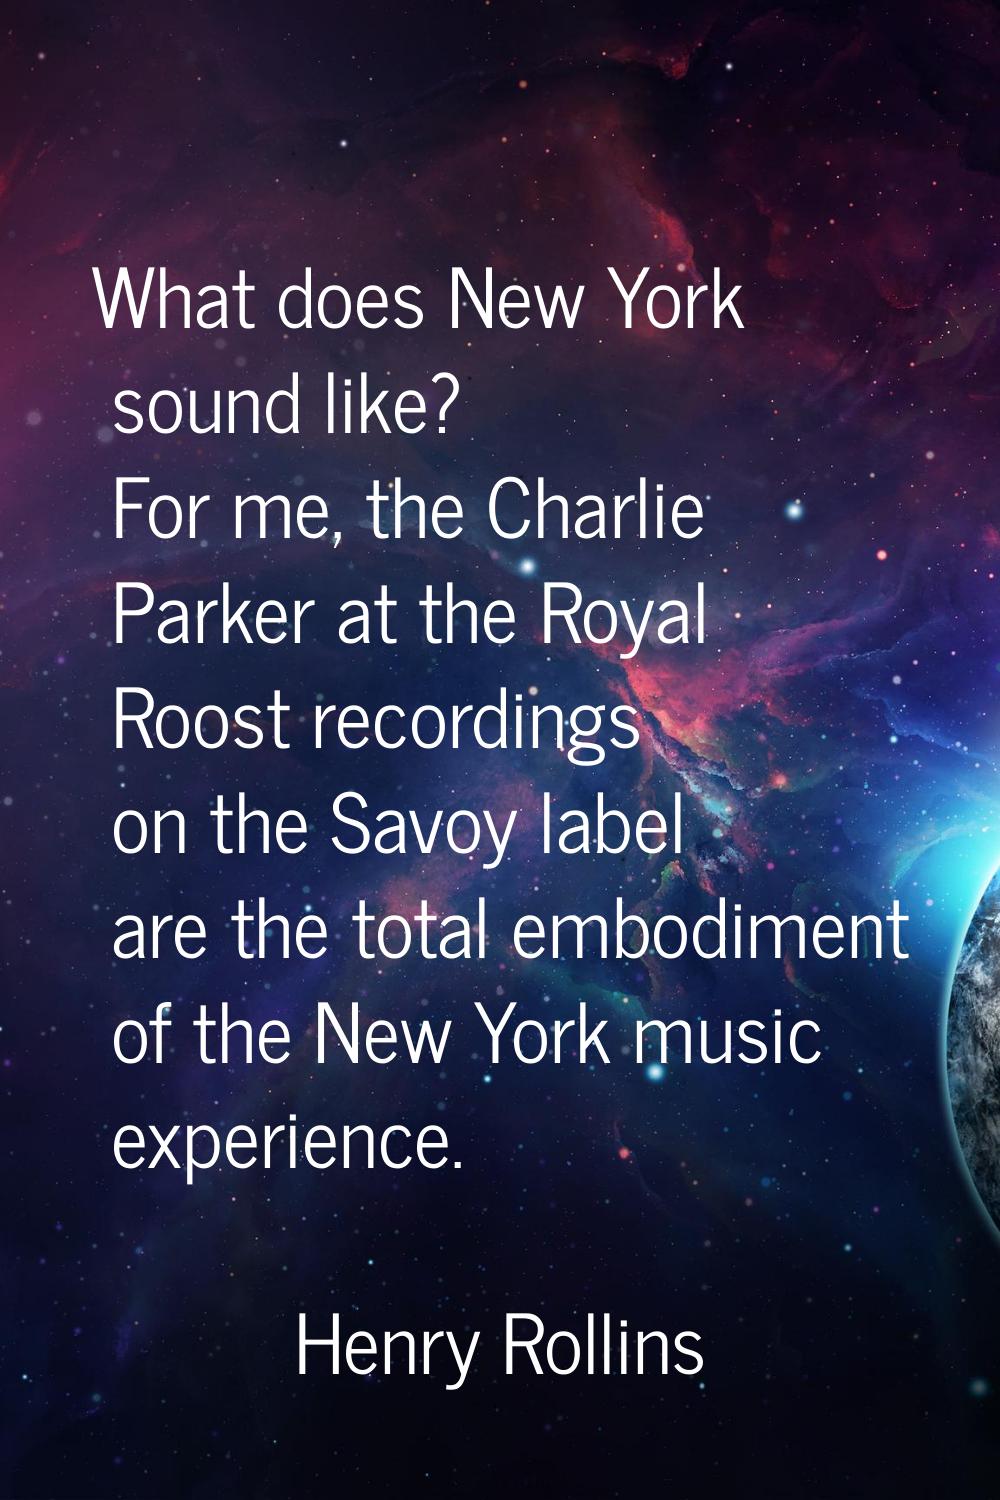 What does New York sound like? For me, the Charlie Parker at the Royal Roost recordings on the Savo